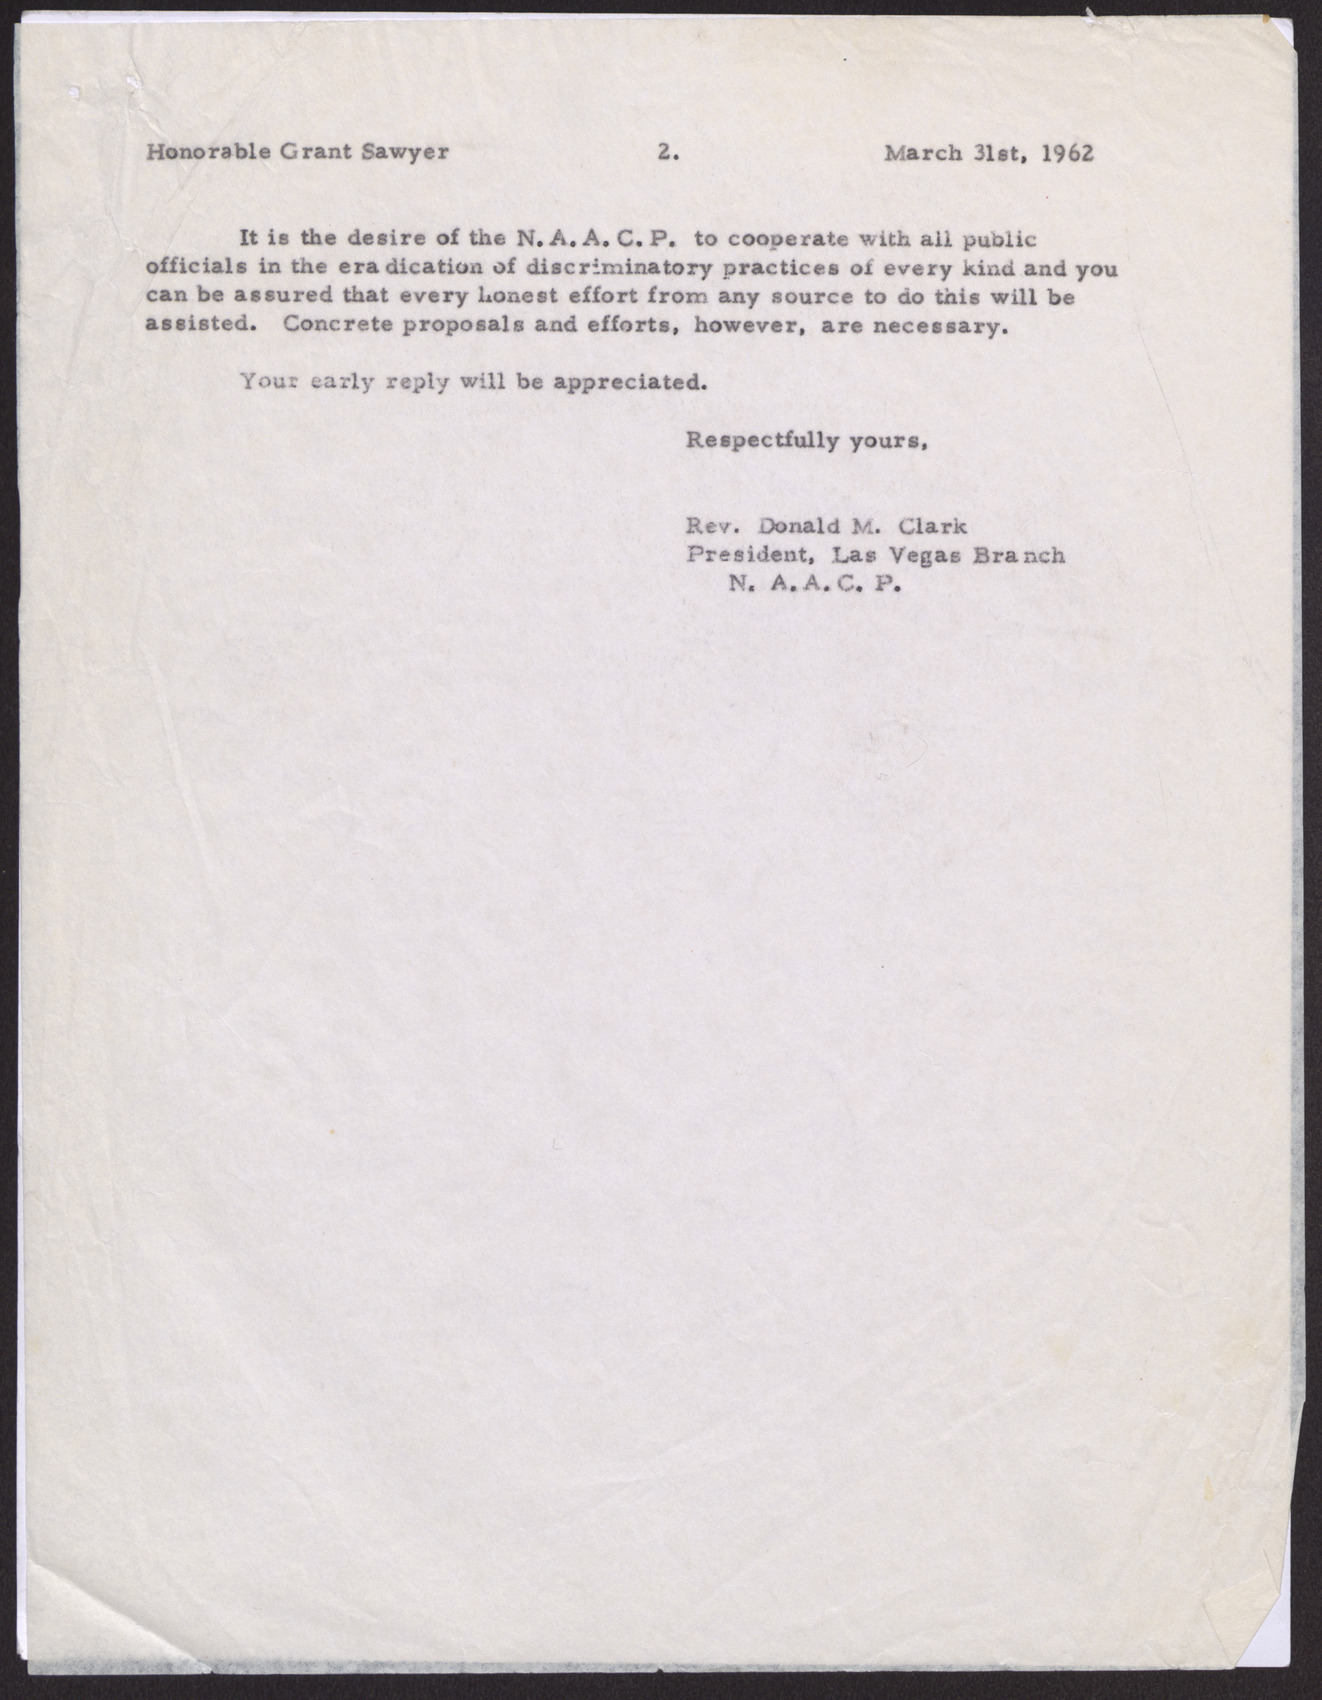 Letter to Honorable Grant Sawyer from Rev. Donald M. Clark (2 pages), March 31, 1962, page 2